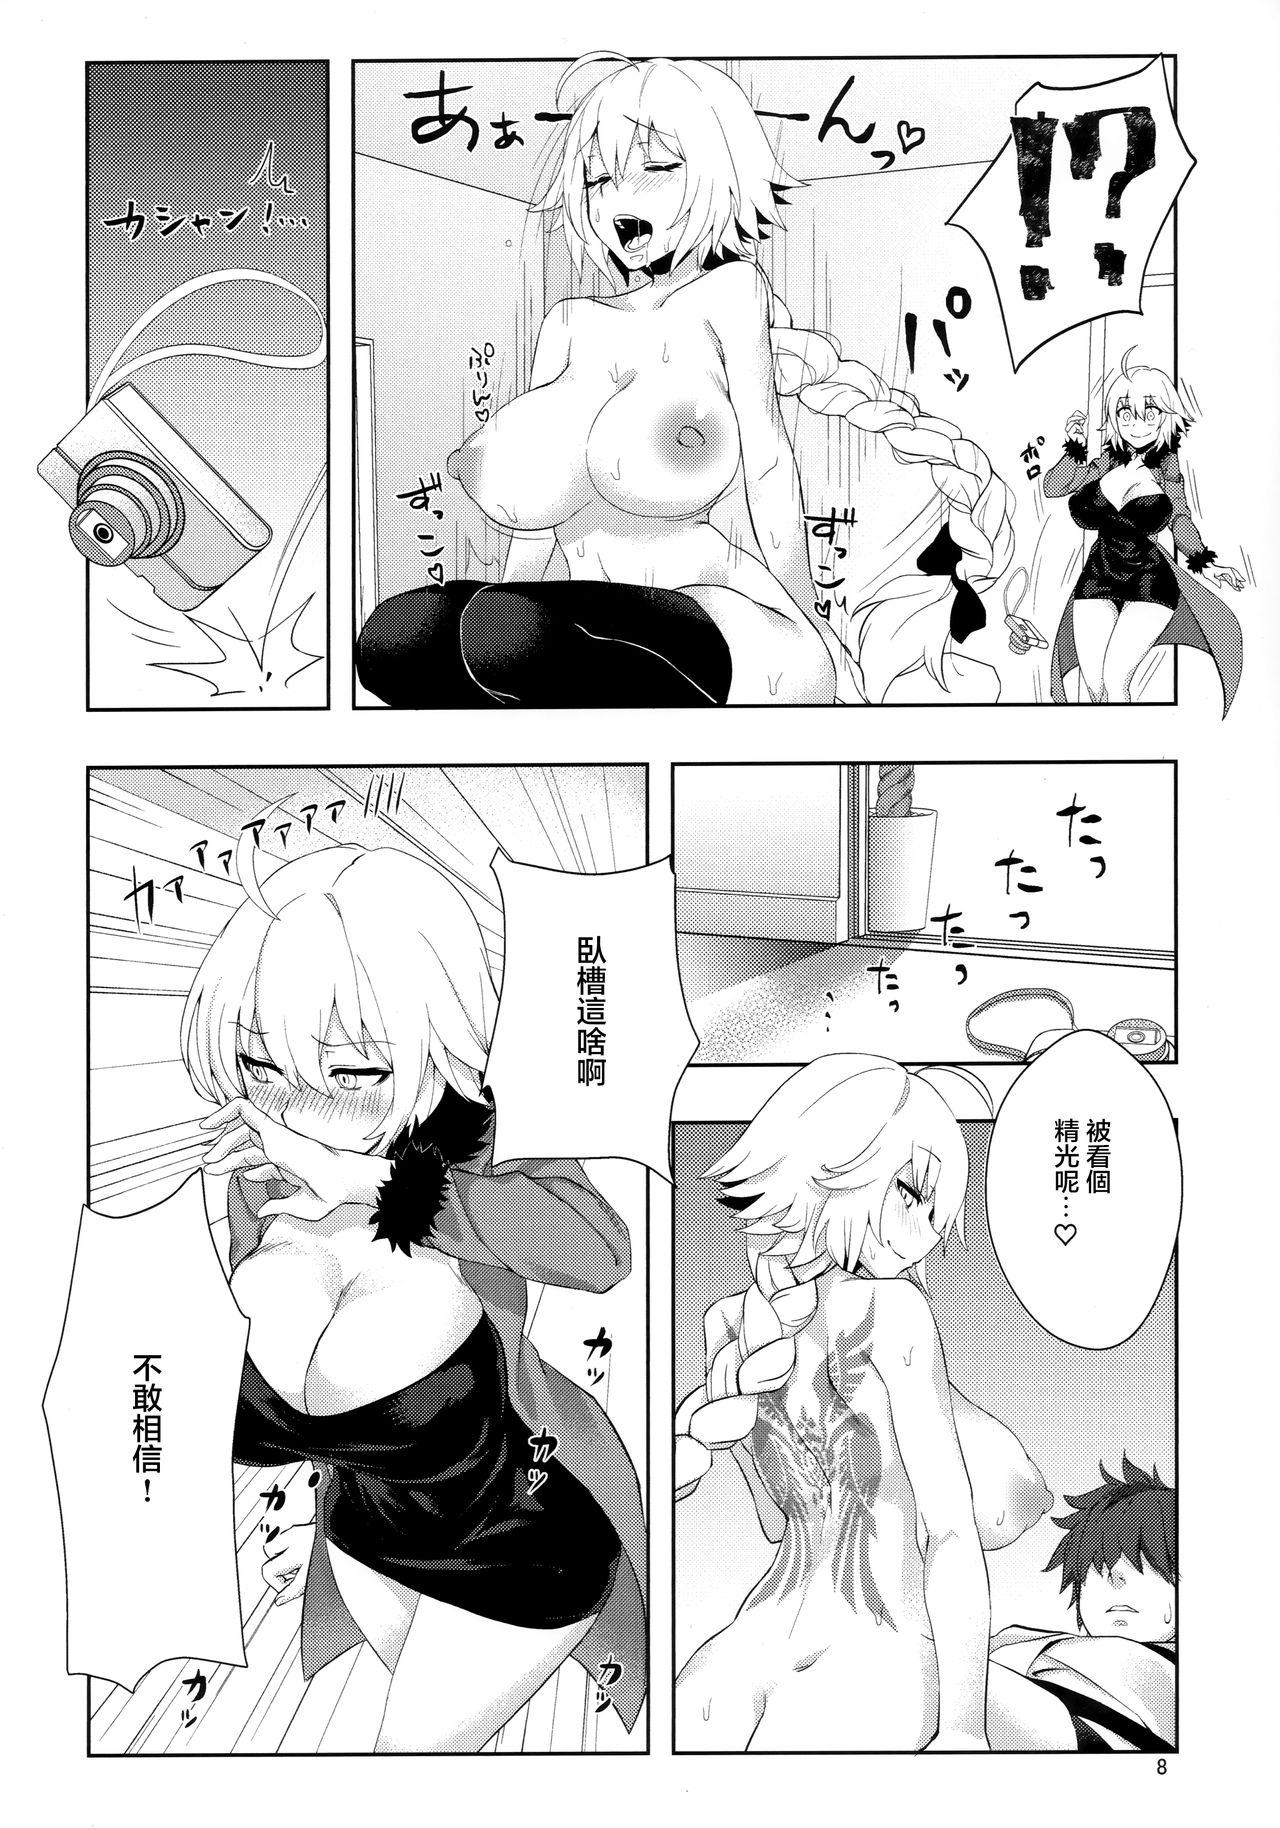 Livesex (CT34) [Punipunikan (Poriuretan)] Muramura H Alter-chan (Fate/Grand Order)[Chinese]【不可视汉化】 - Fate grand order Old And Young - Page 8